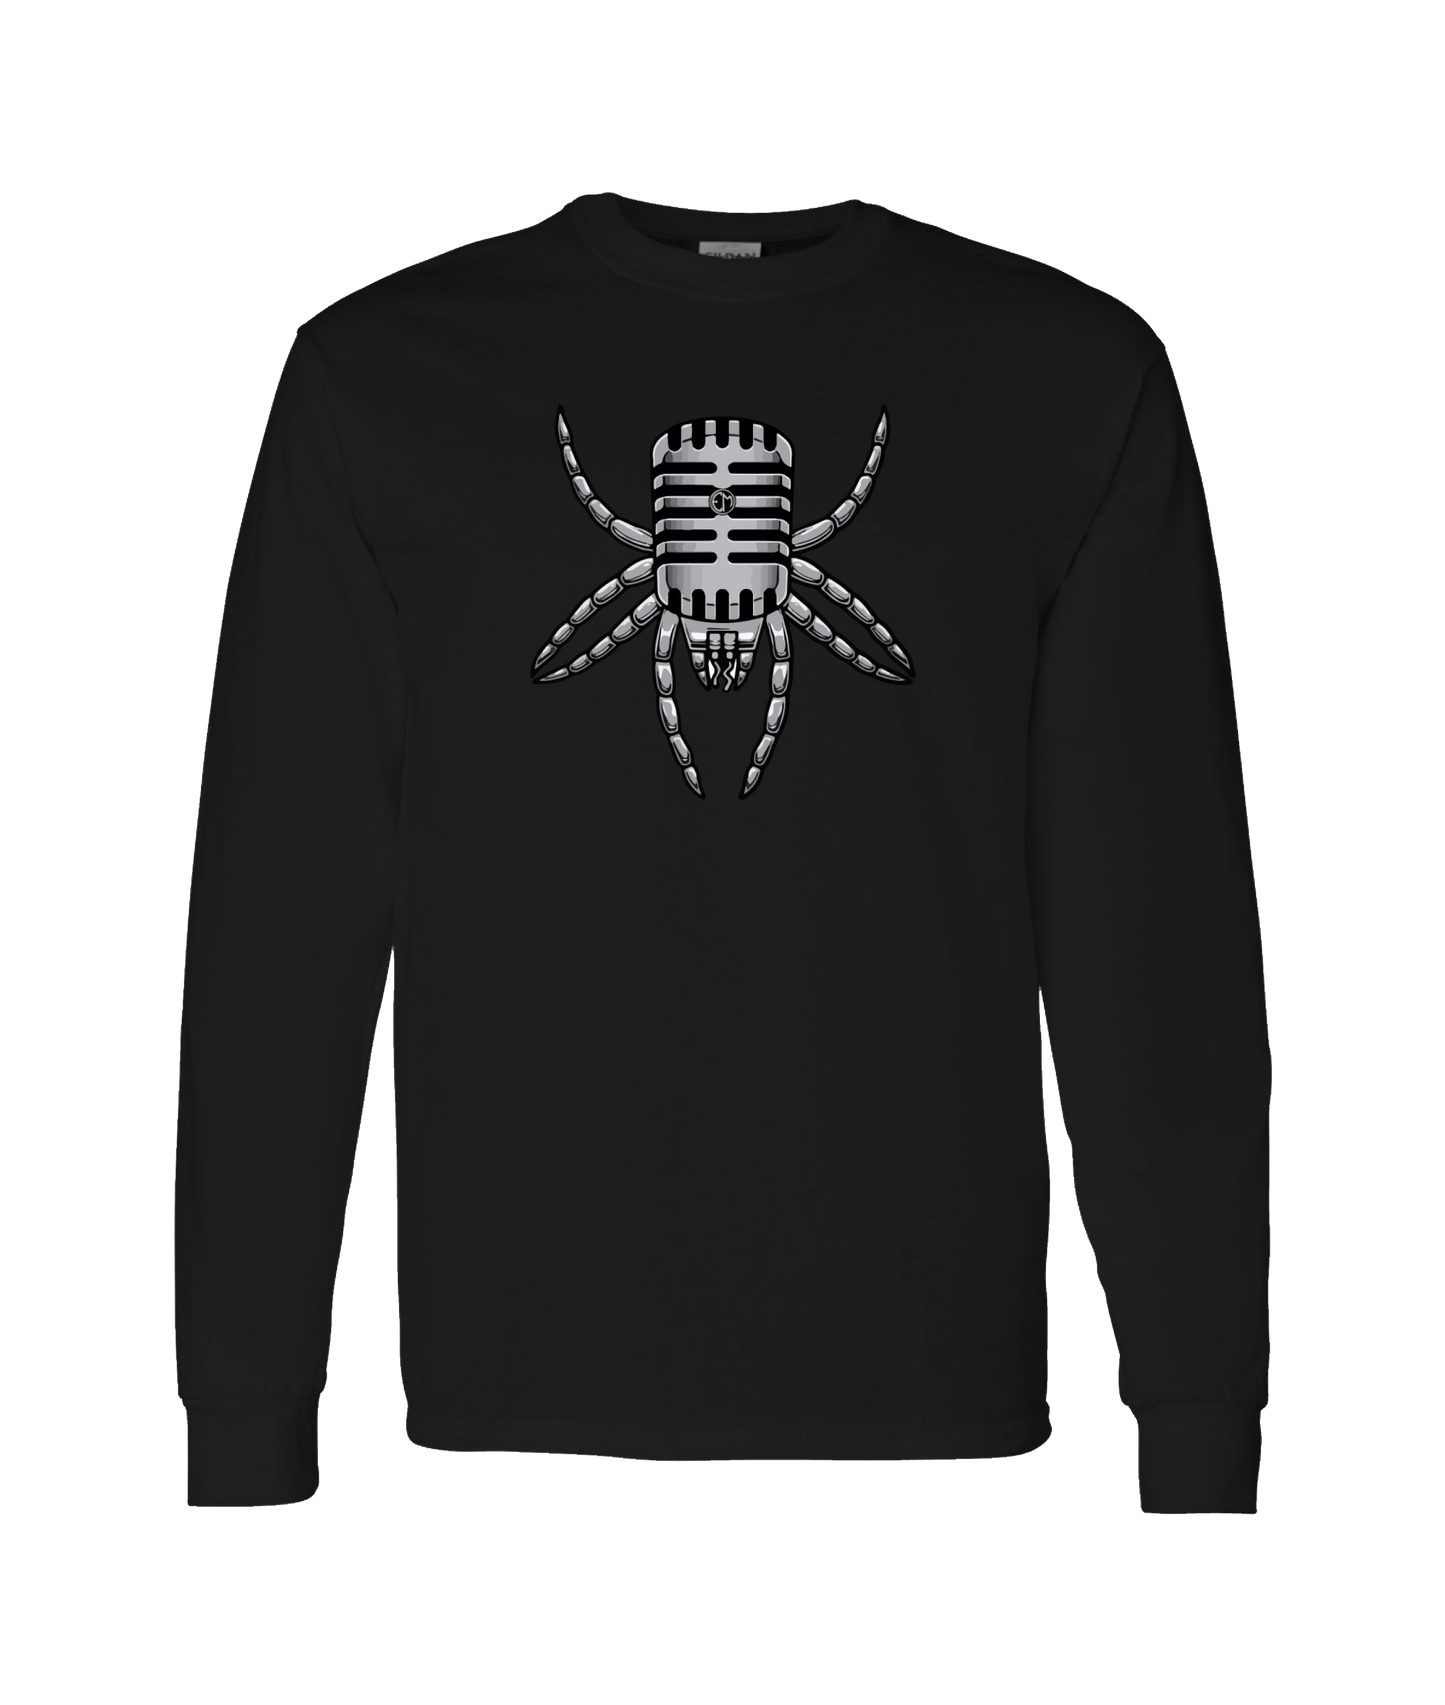 The Ear Mites - Mite - Black Long Sleeve T